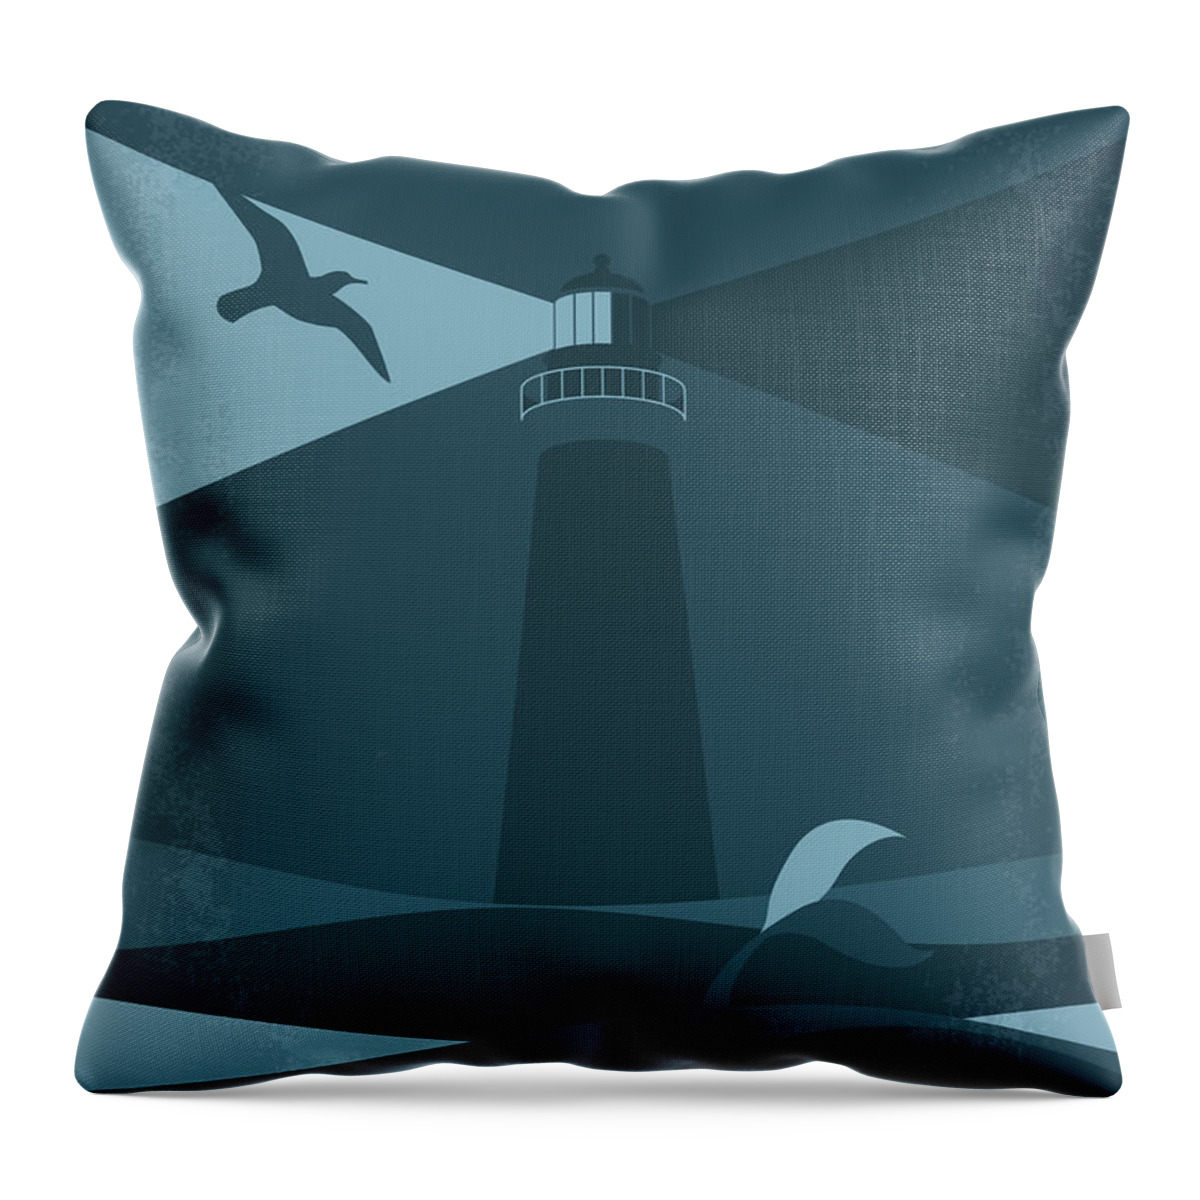 The Lighthouse Throw Pillow featuring the digital art No1183 My The Lighthouse minimal movie poster by Chungkong Art